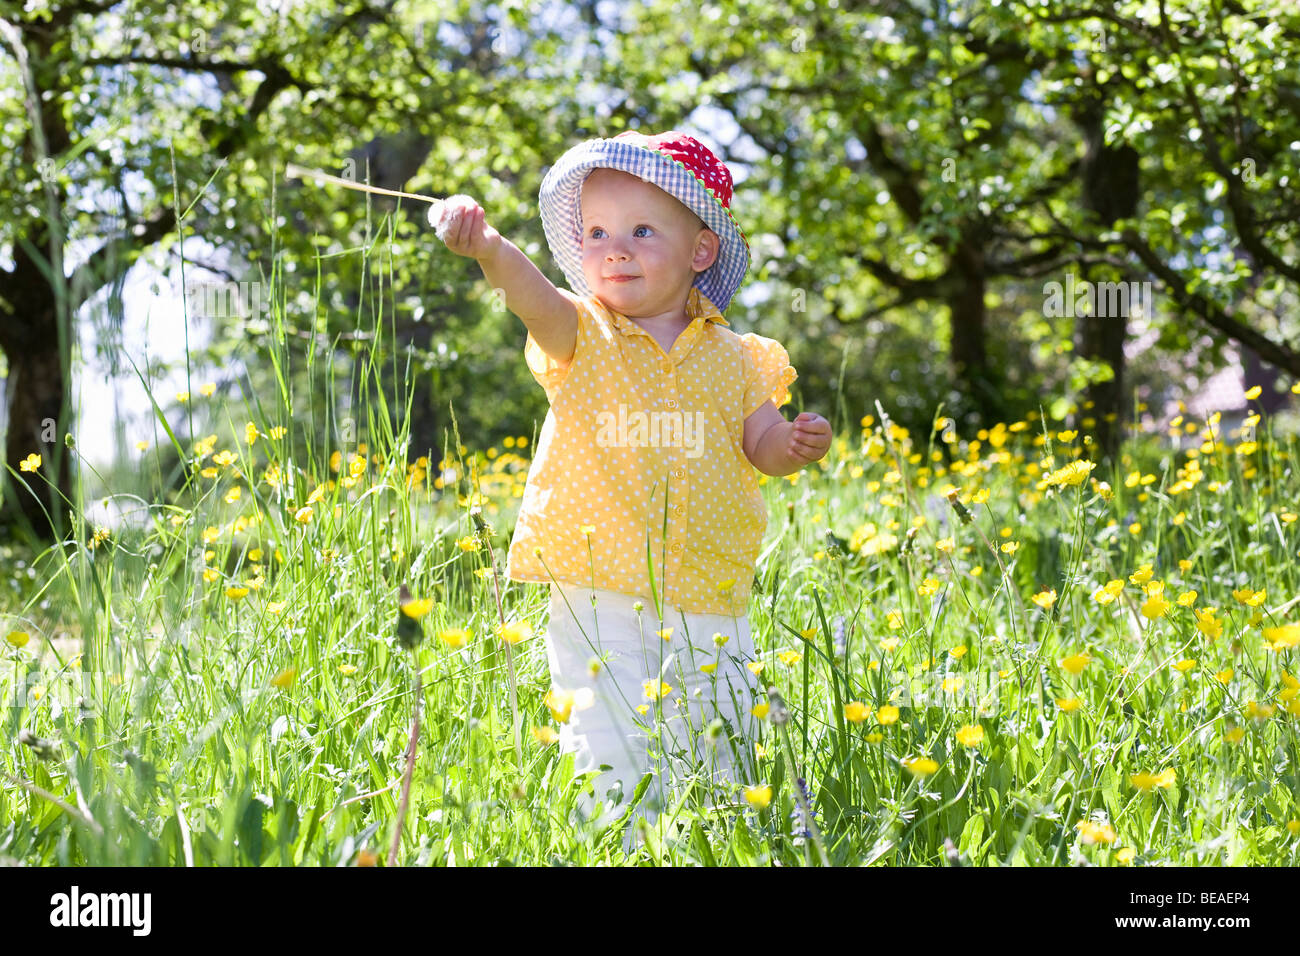 A toddler in standing amongst wildflowers Stock Photo